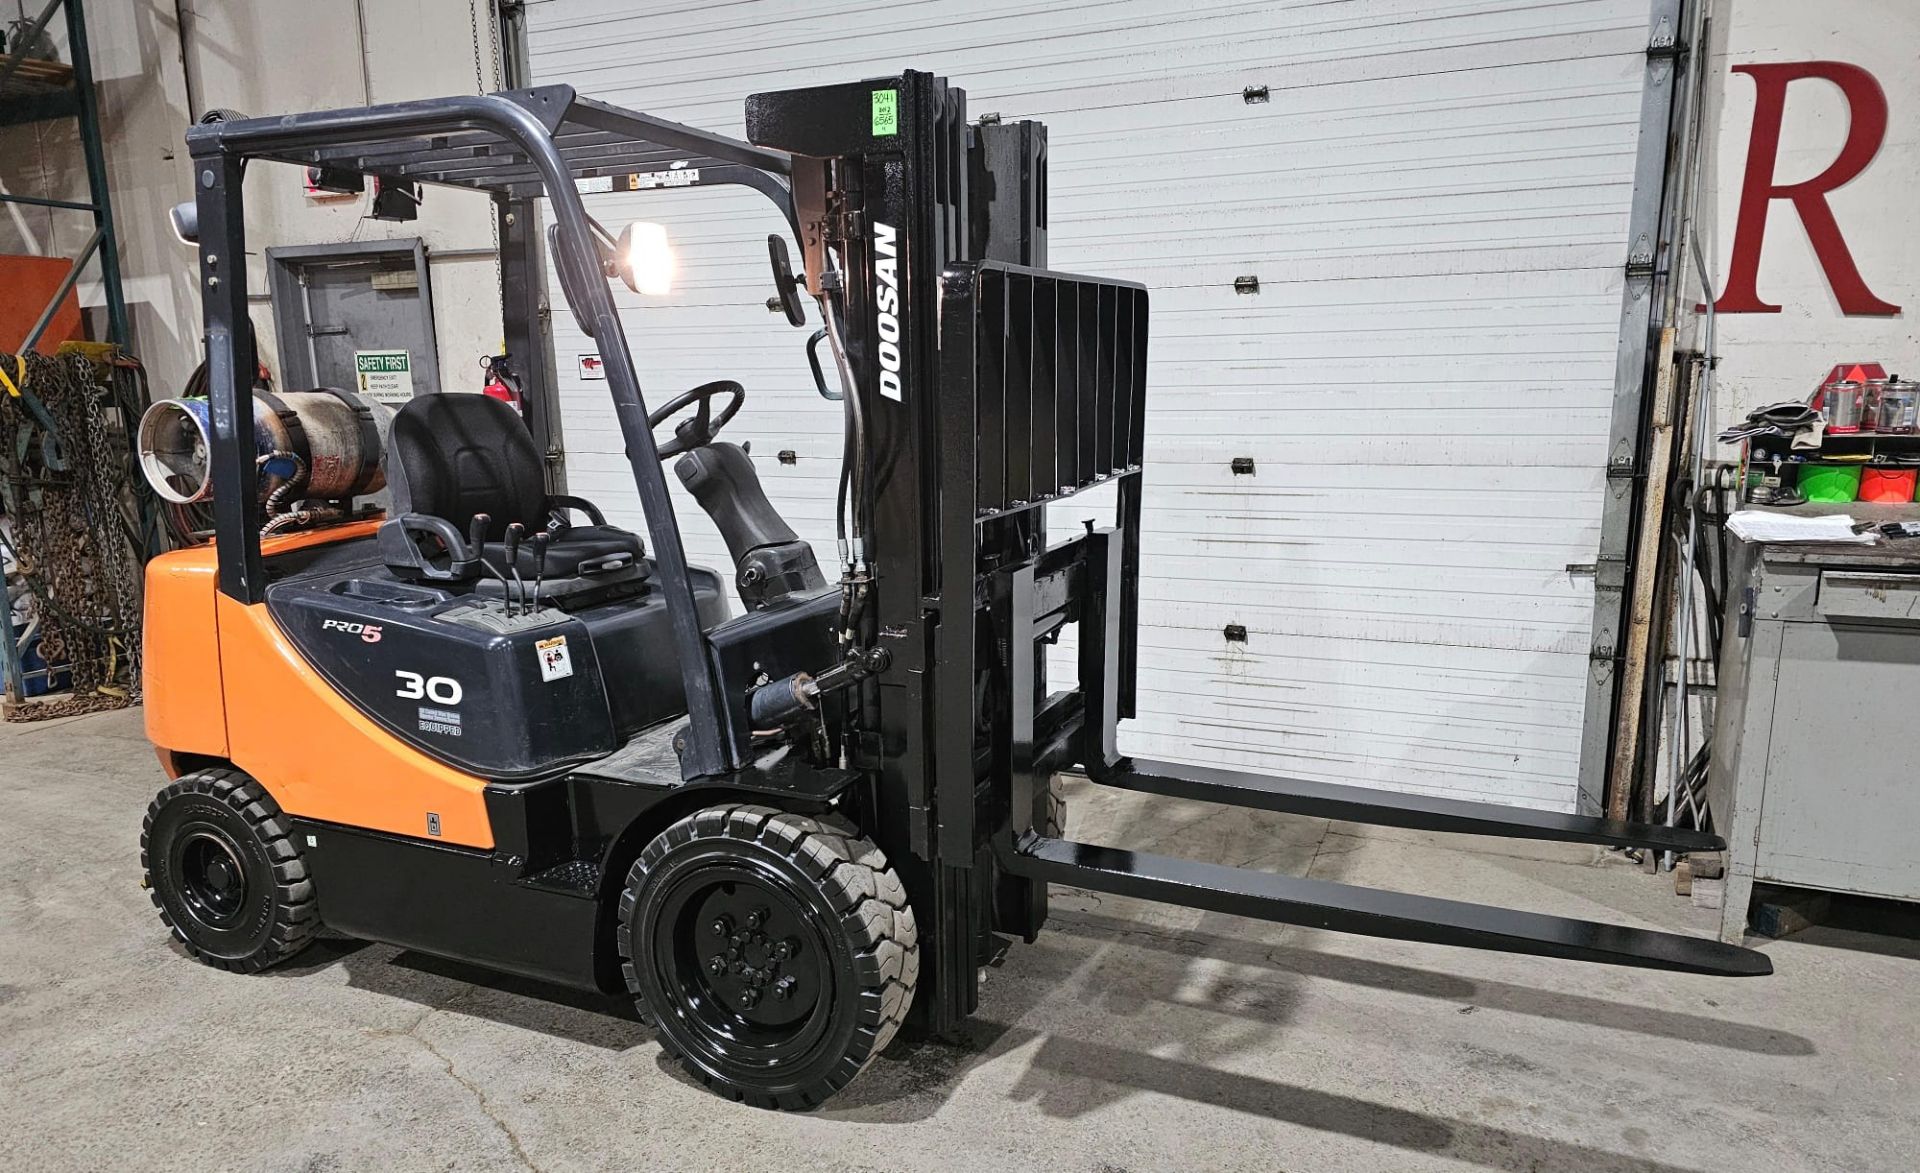 2012 Doosan 6,000lbs Capacity OUTDOOR LPG (Propane) with LOW HOURS Forklift 3-stage 189" load height - Image 2 of 7